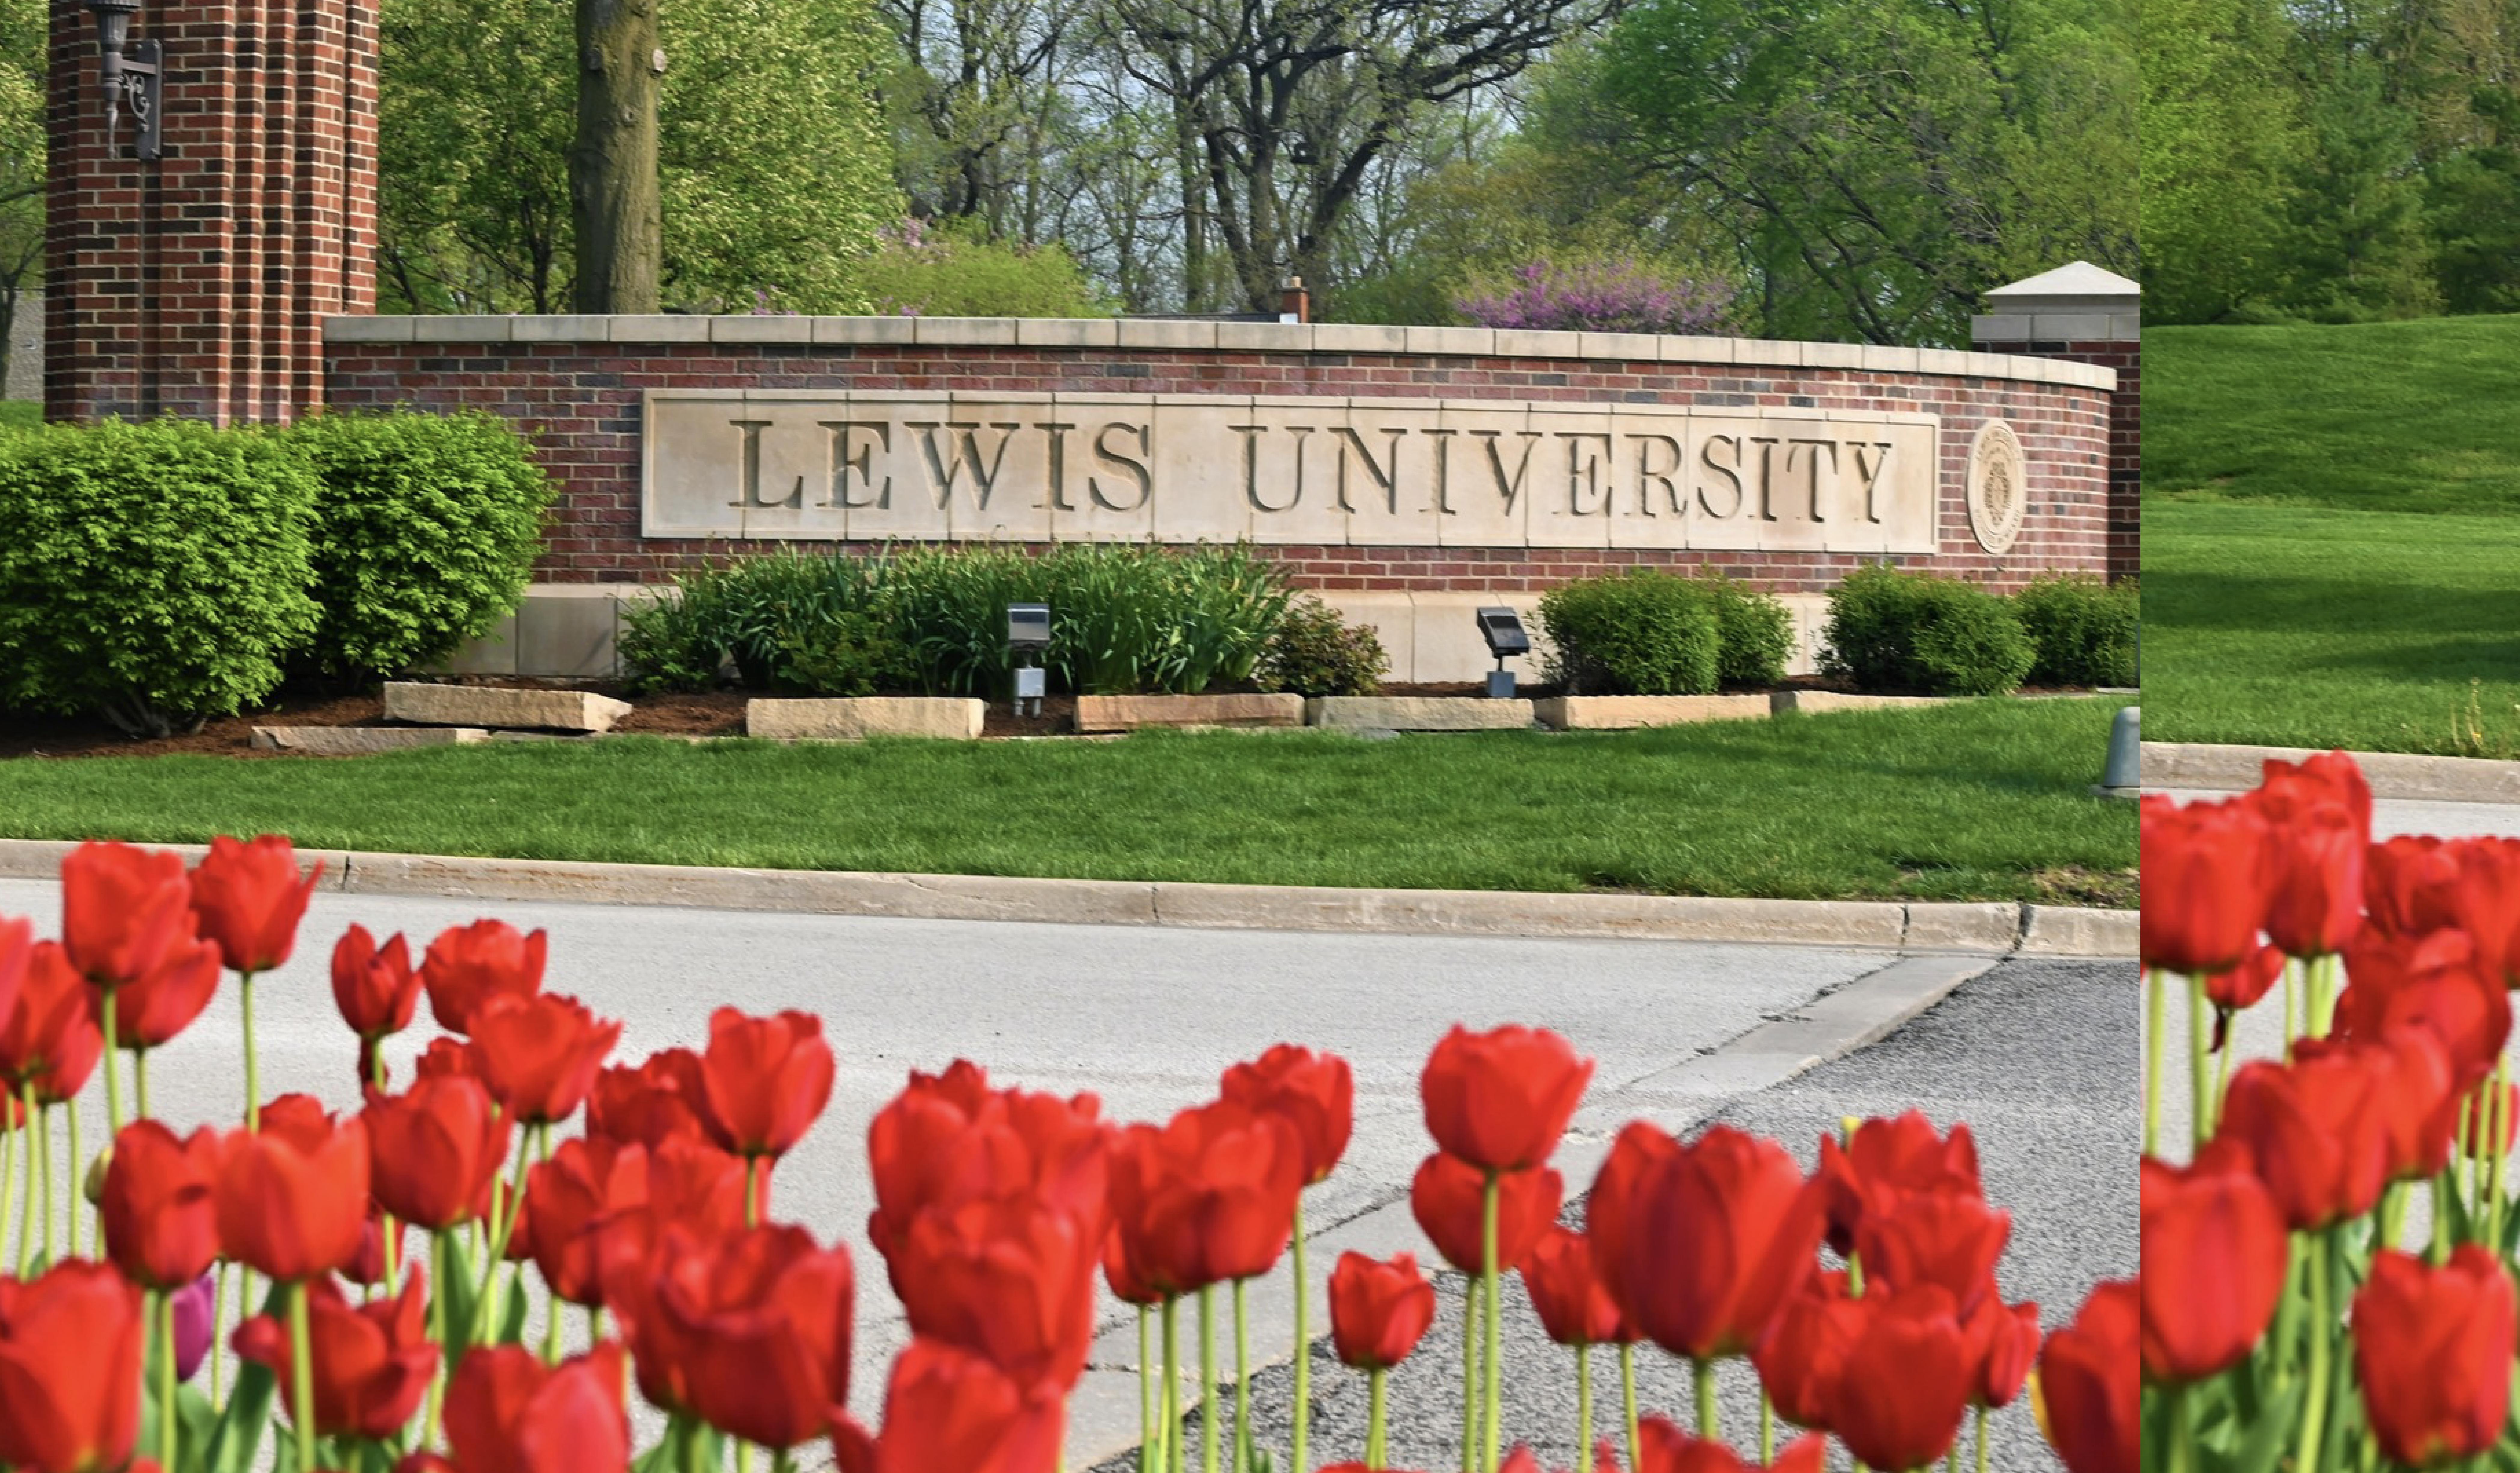 The Lewis University sign on a stone wall behind red tulips